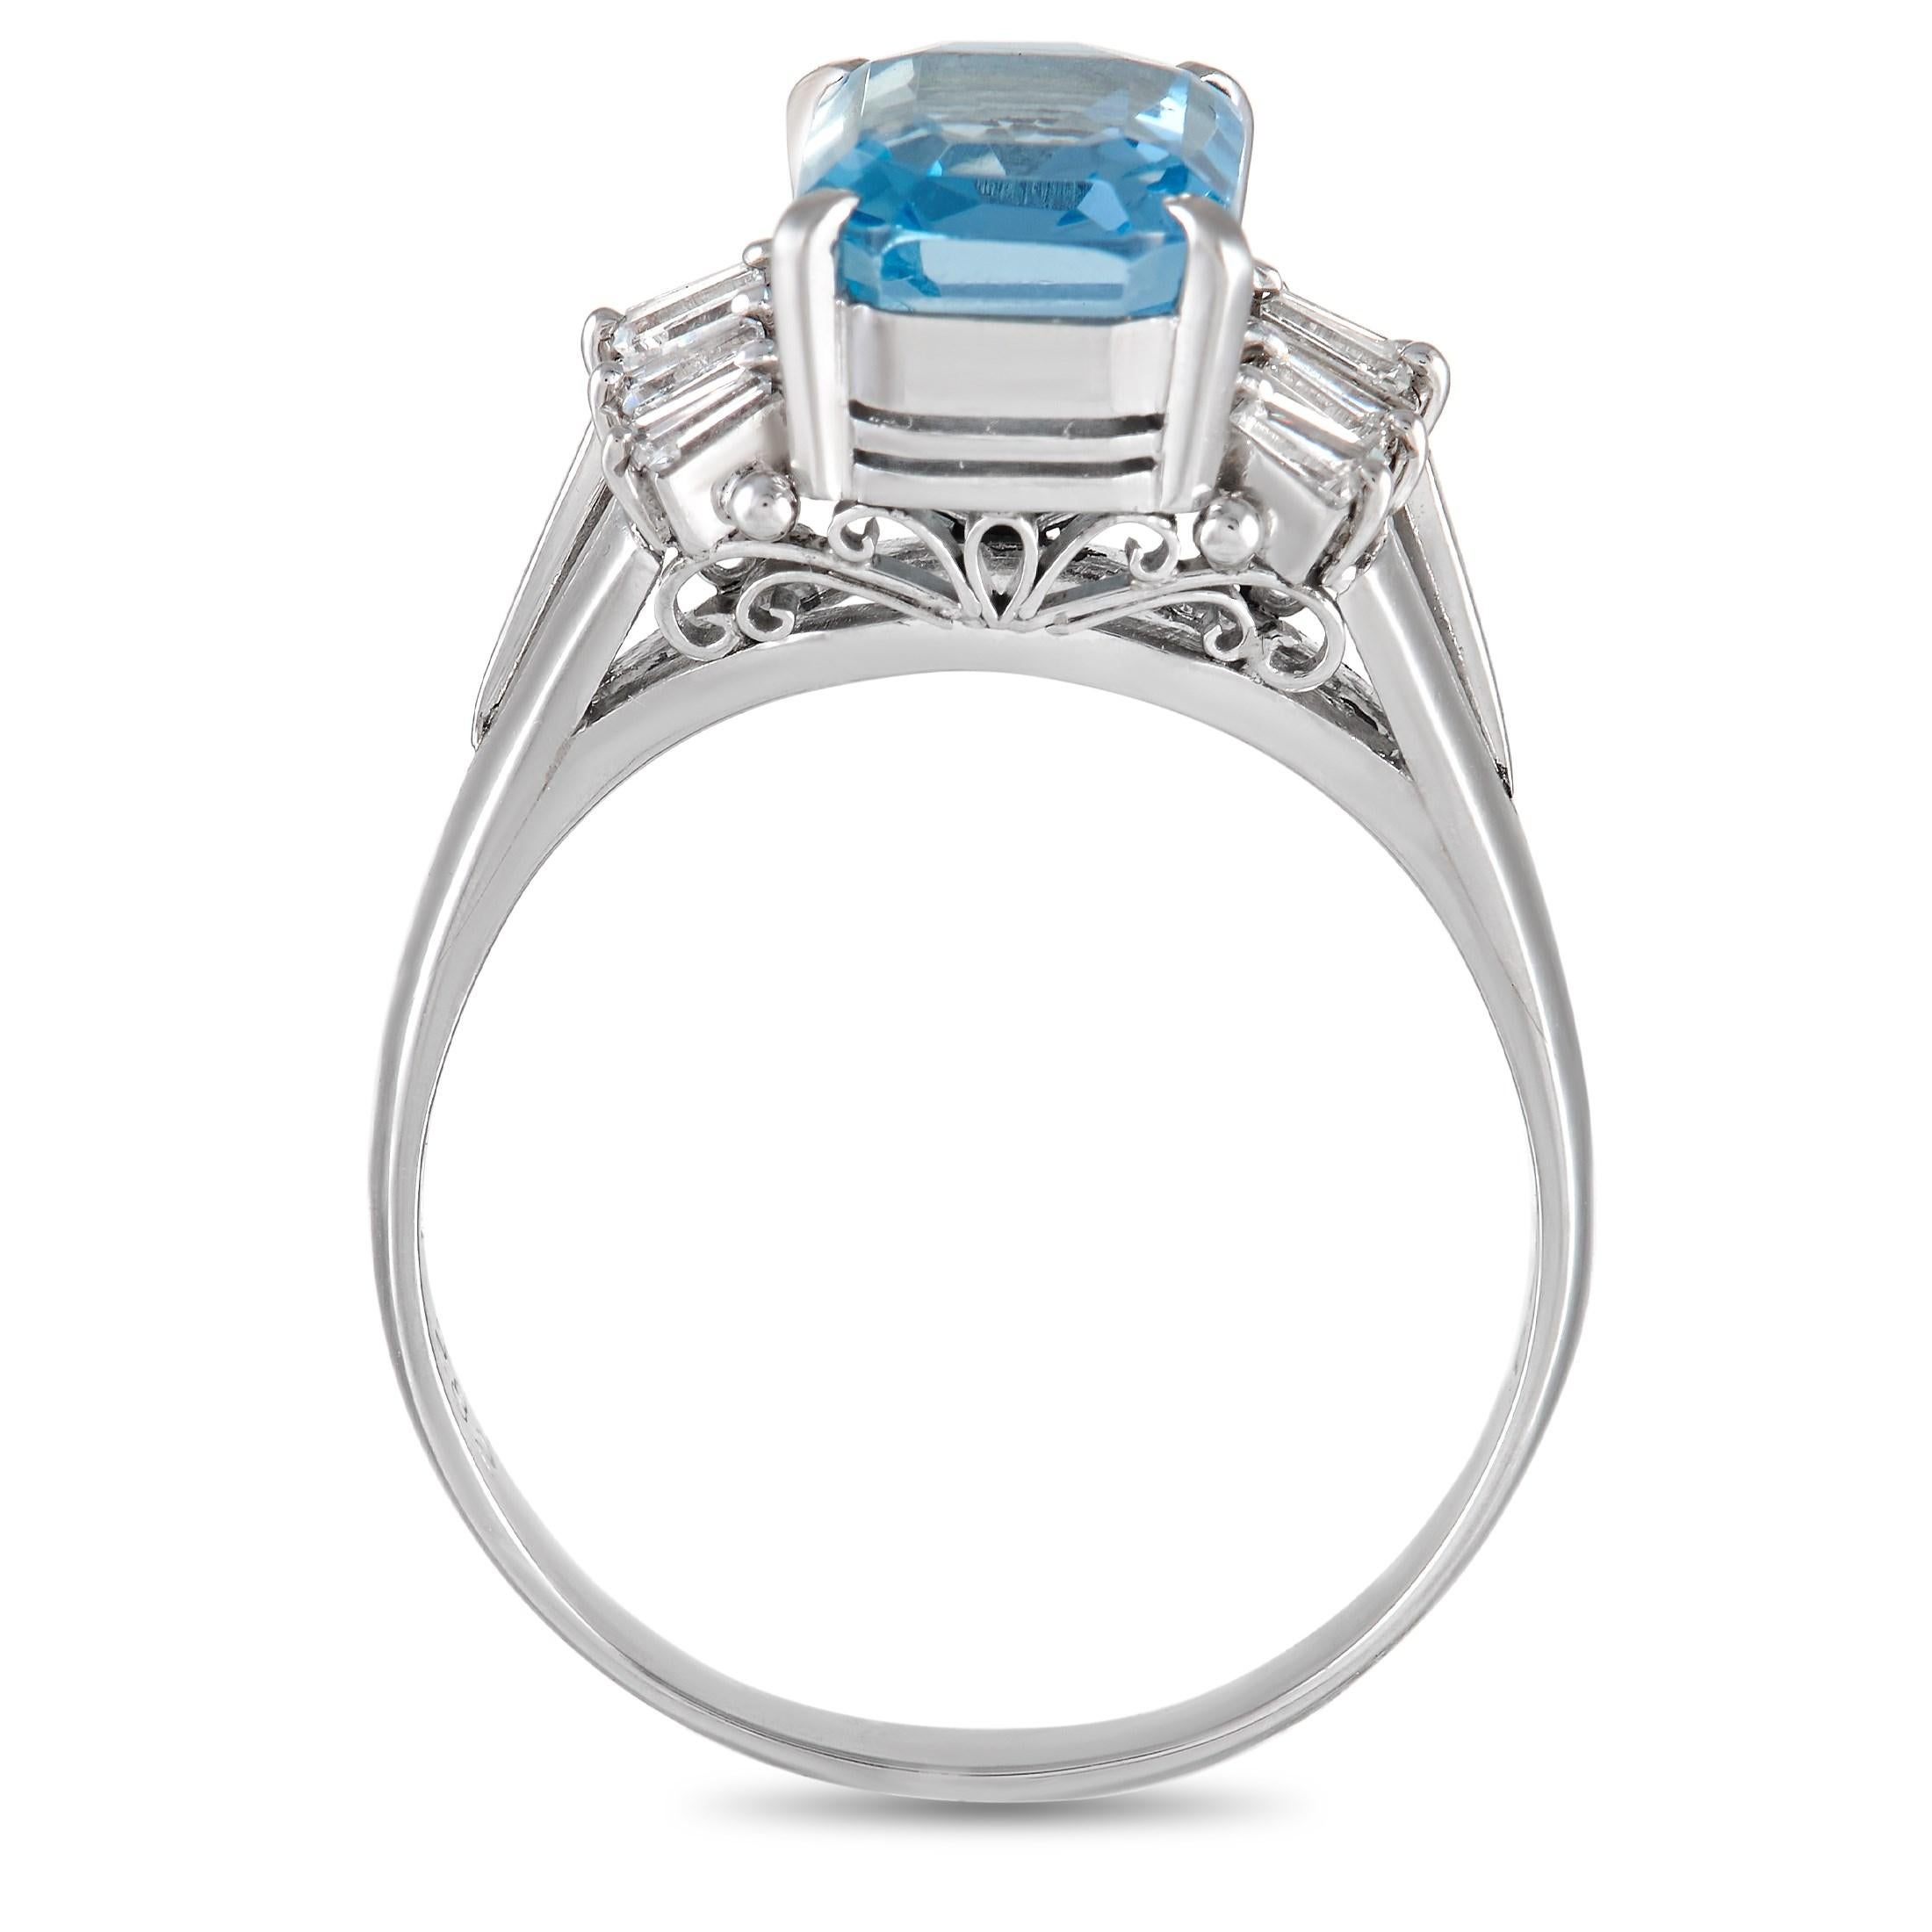 A simple Platinum setting sets the stage for this ring’s breathtaking collection of gemstones. At the center, a bright blue 2.82 carat Aquamarine gemstone adds a pop of color to the understated design. Diamond accents with a total weight of 0.38